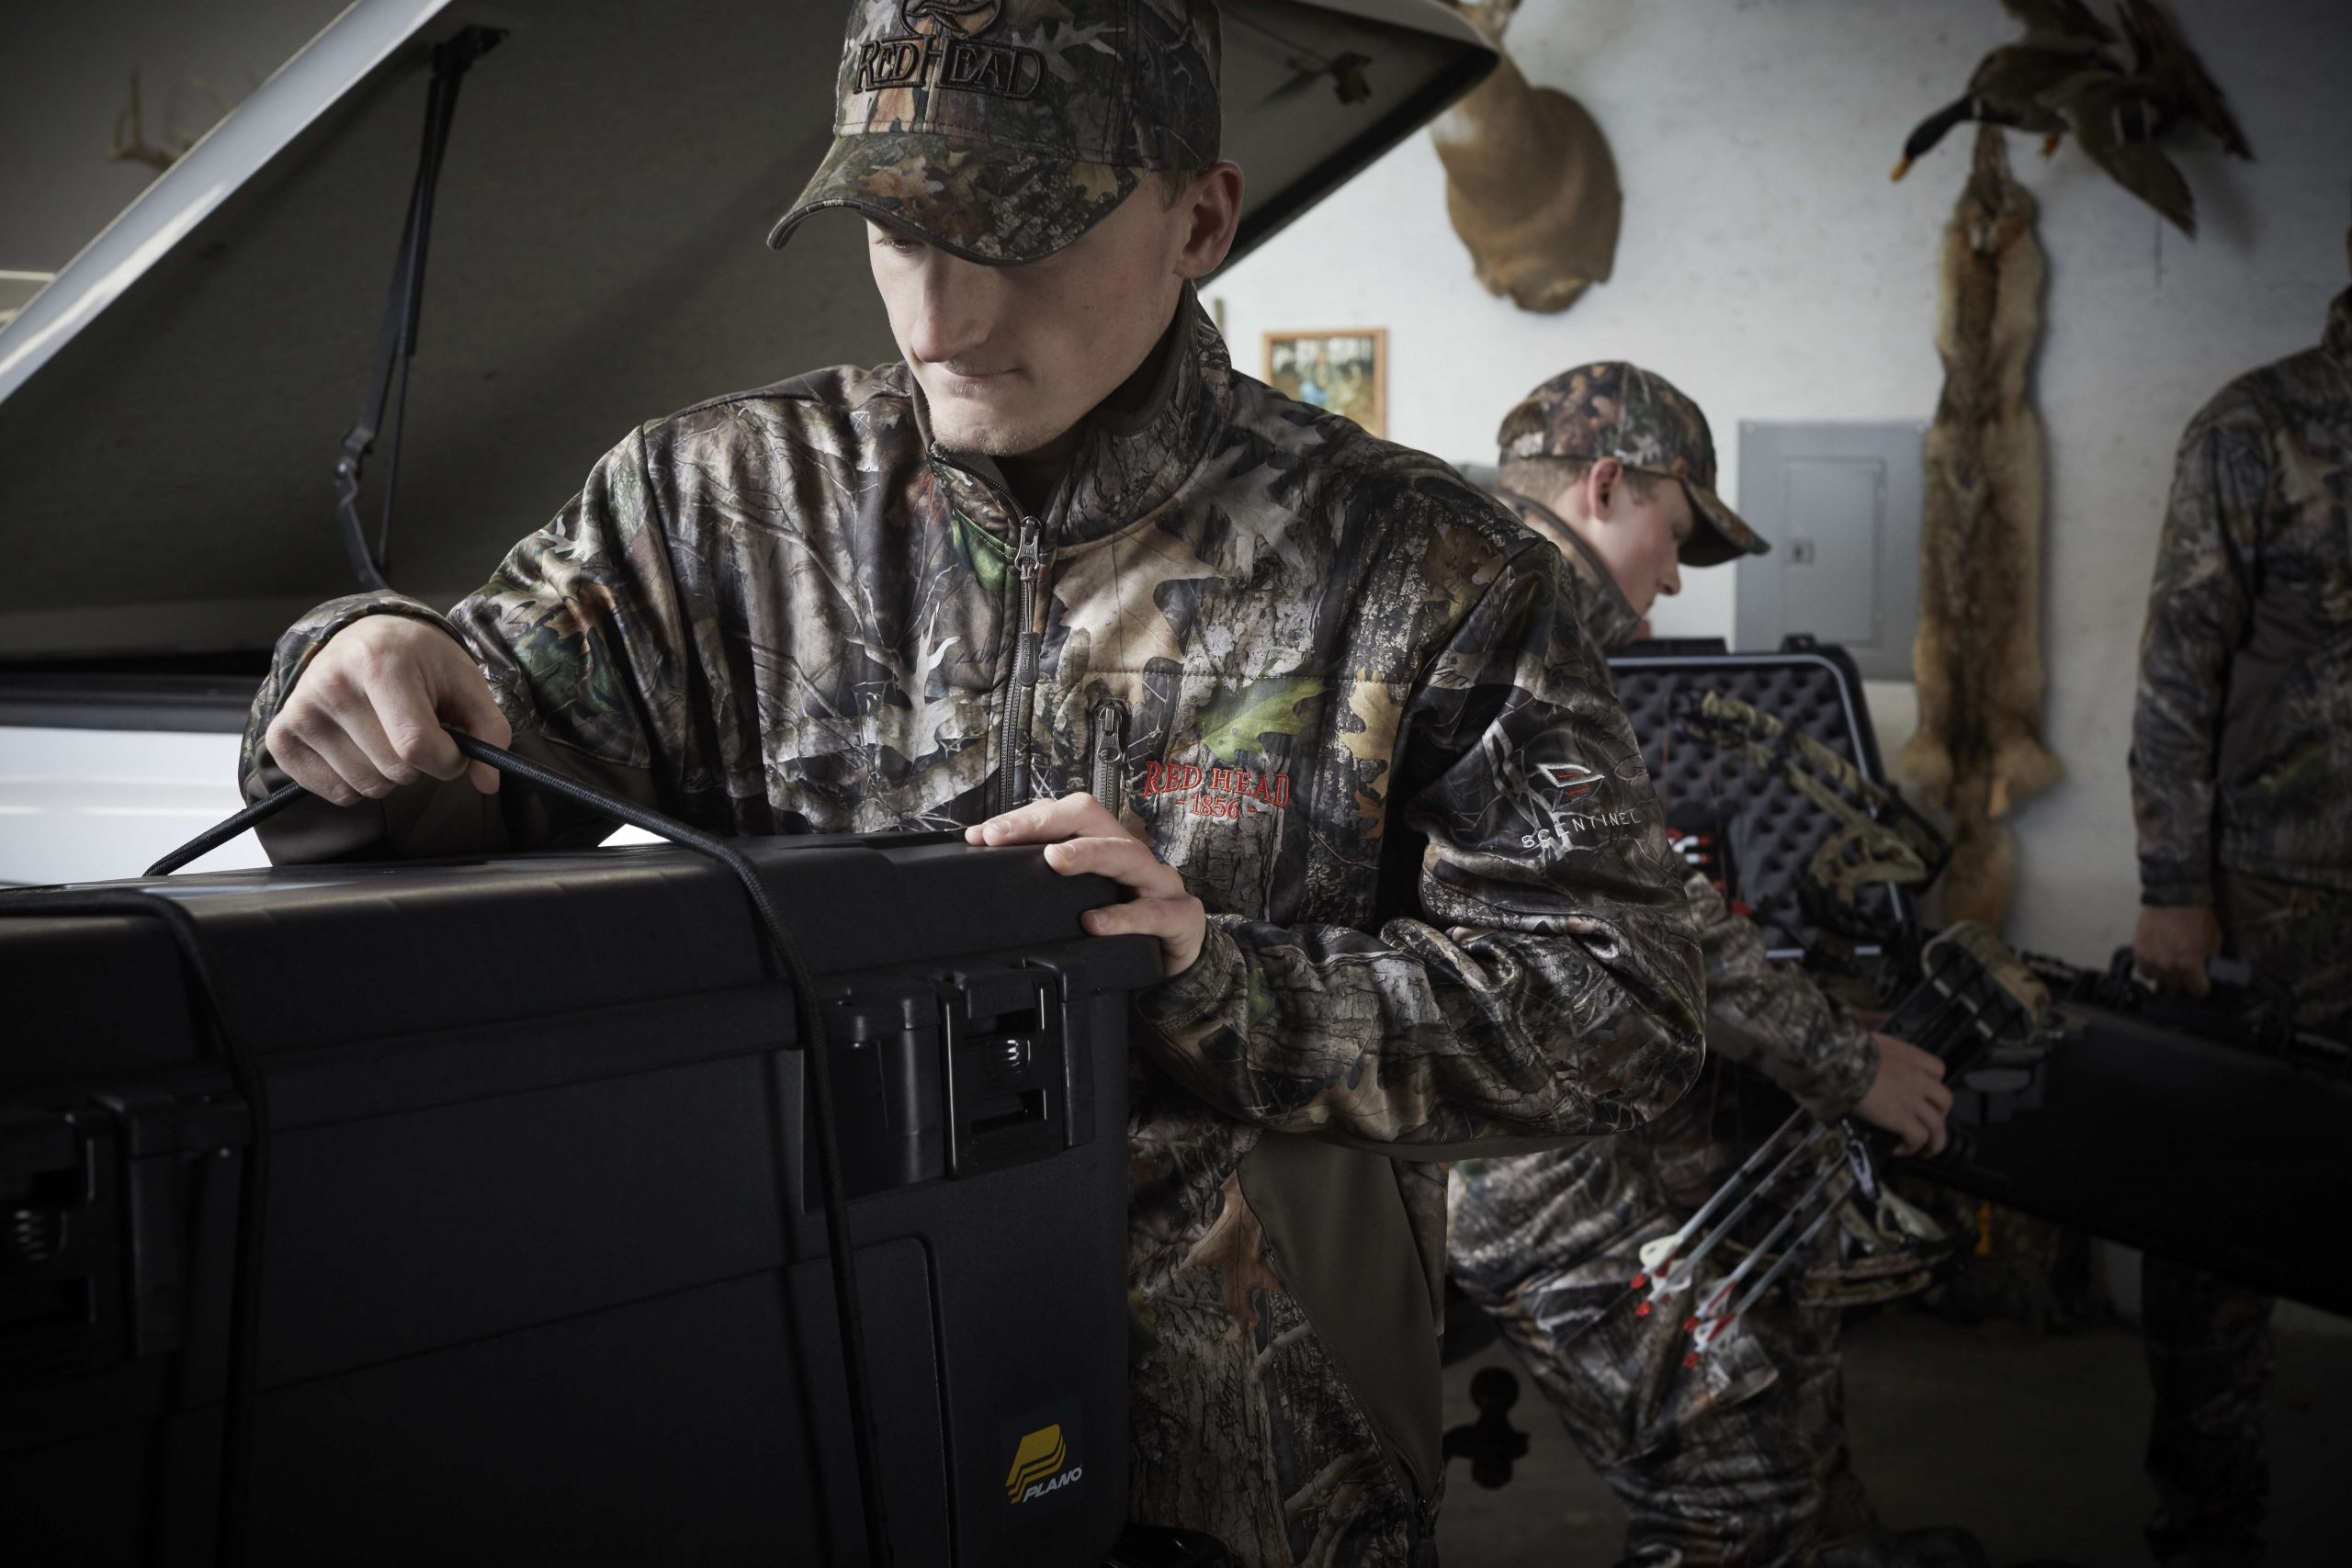 Jackson straps a Plano Sportsmans Trunk to the four-wheeler while Nicholas gets his bow ready; the amount of gear they take with them is staggering.